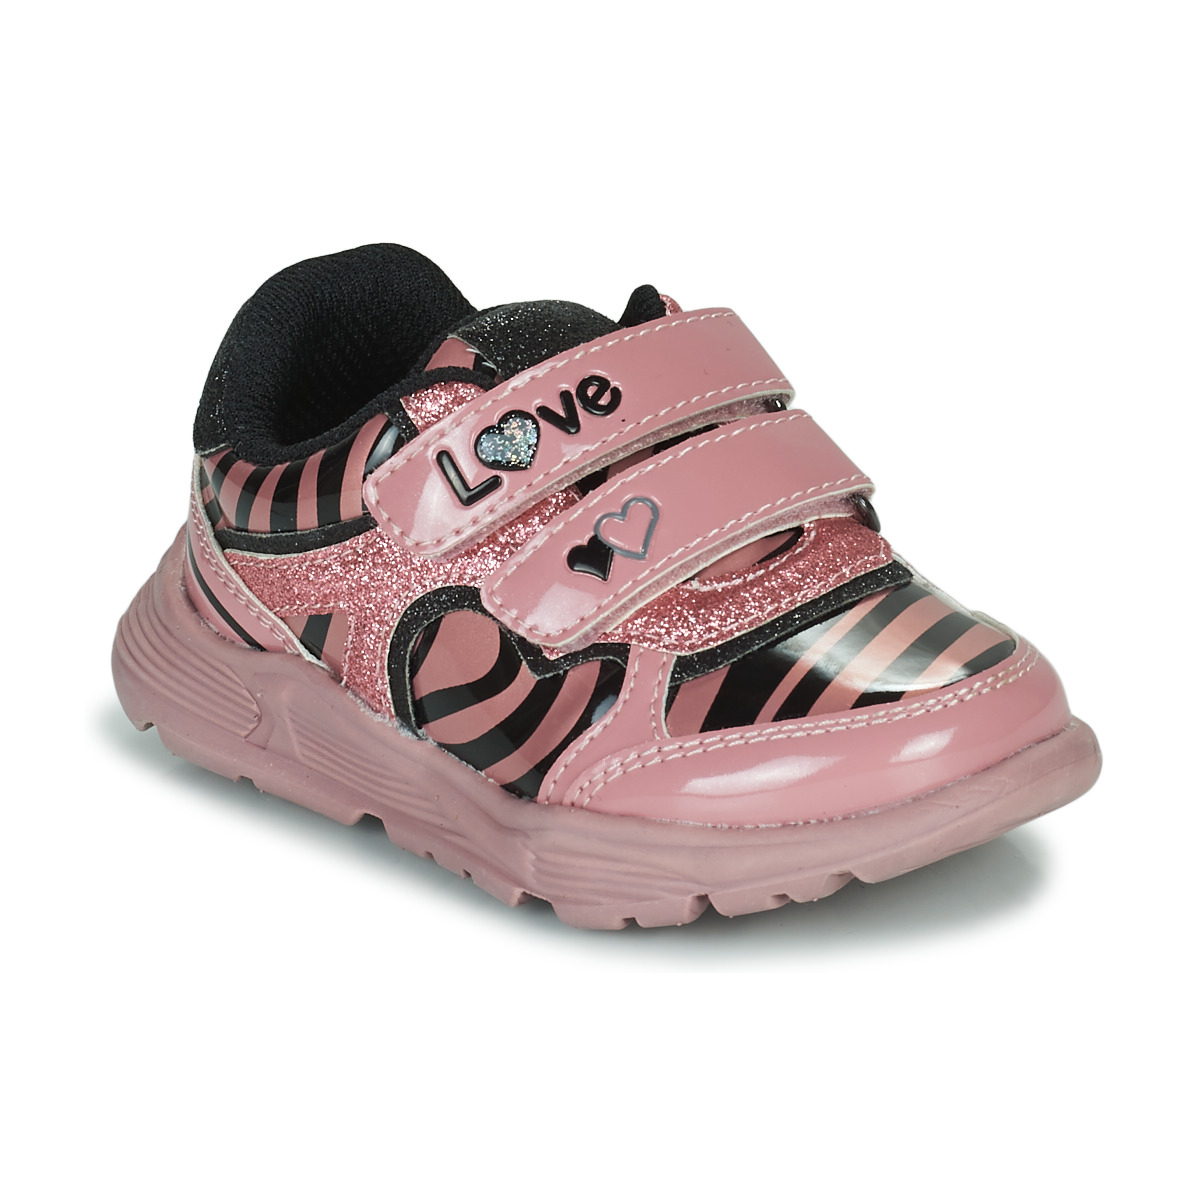 Shoes Girl Low top trainers Chicco CANDACE Pink / Black